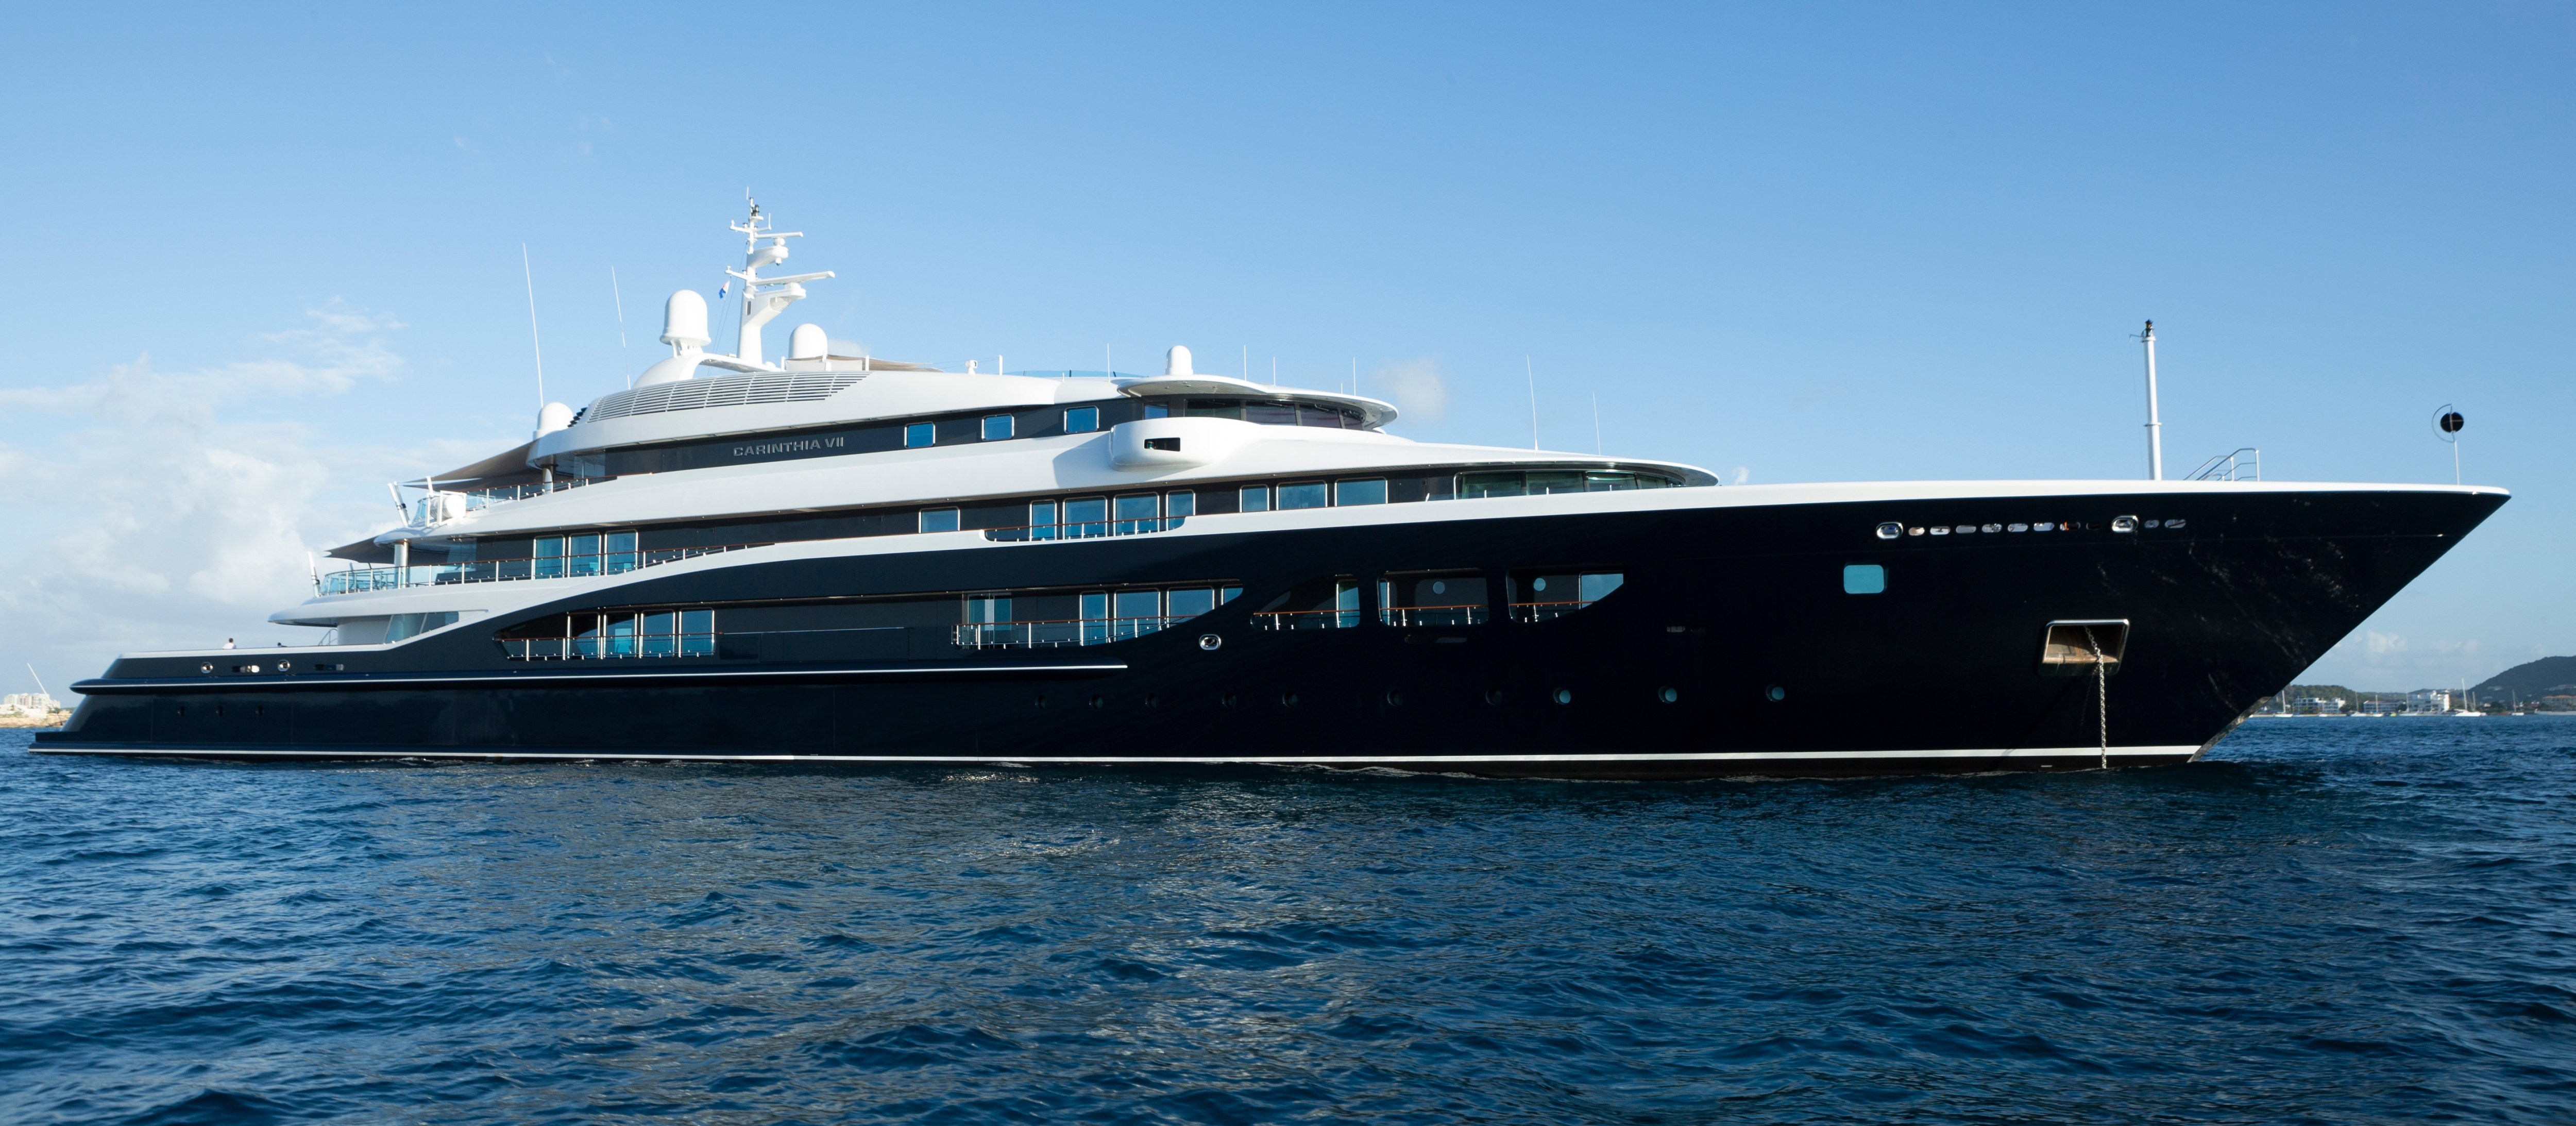 Carinthia VII is 97m long and its six decks rise 23m above the waterline